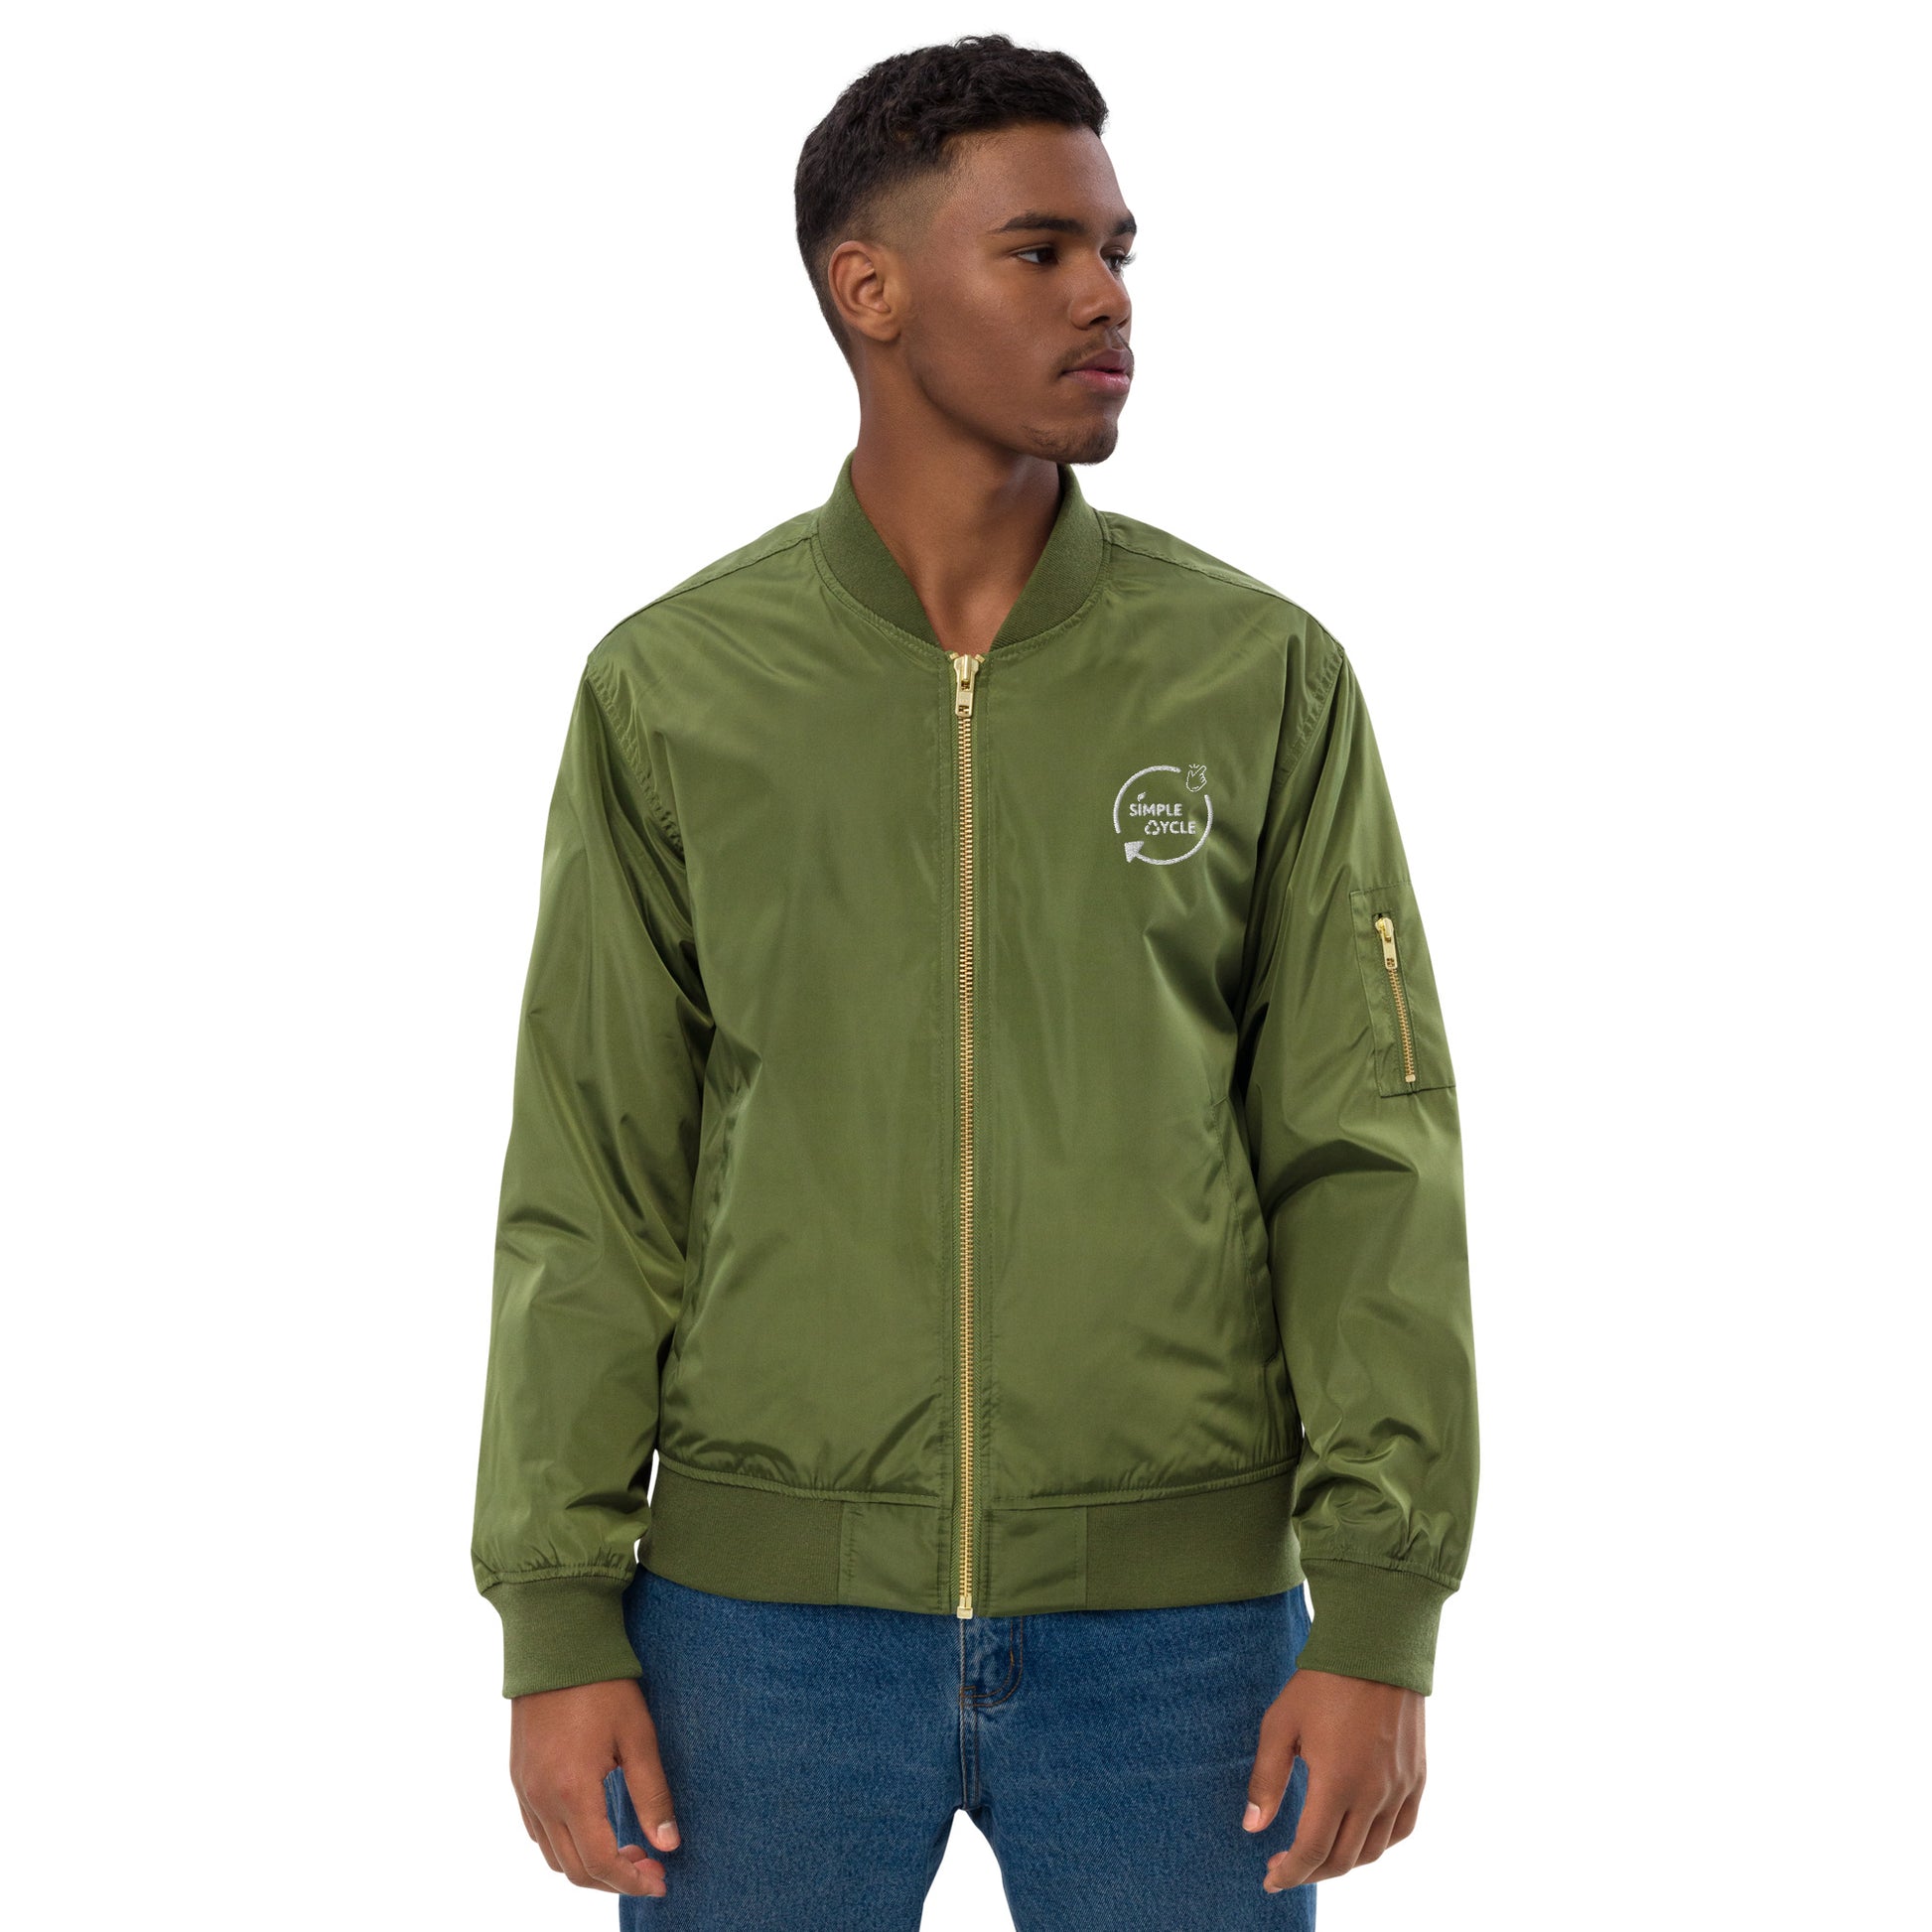 SimpleCycle Embroidered Premium Recycled Bomber Jacket green on a model zipped